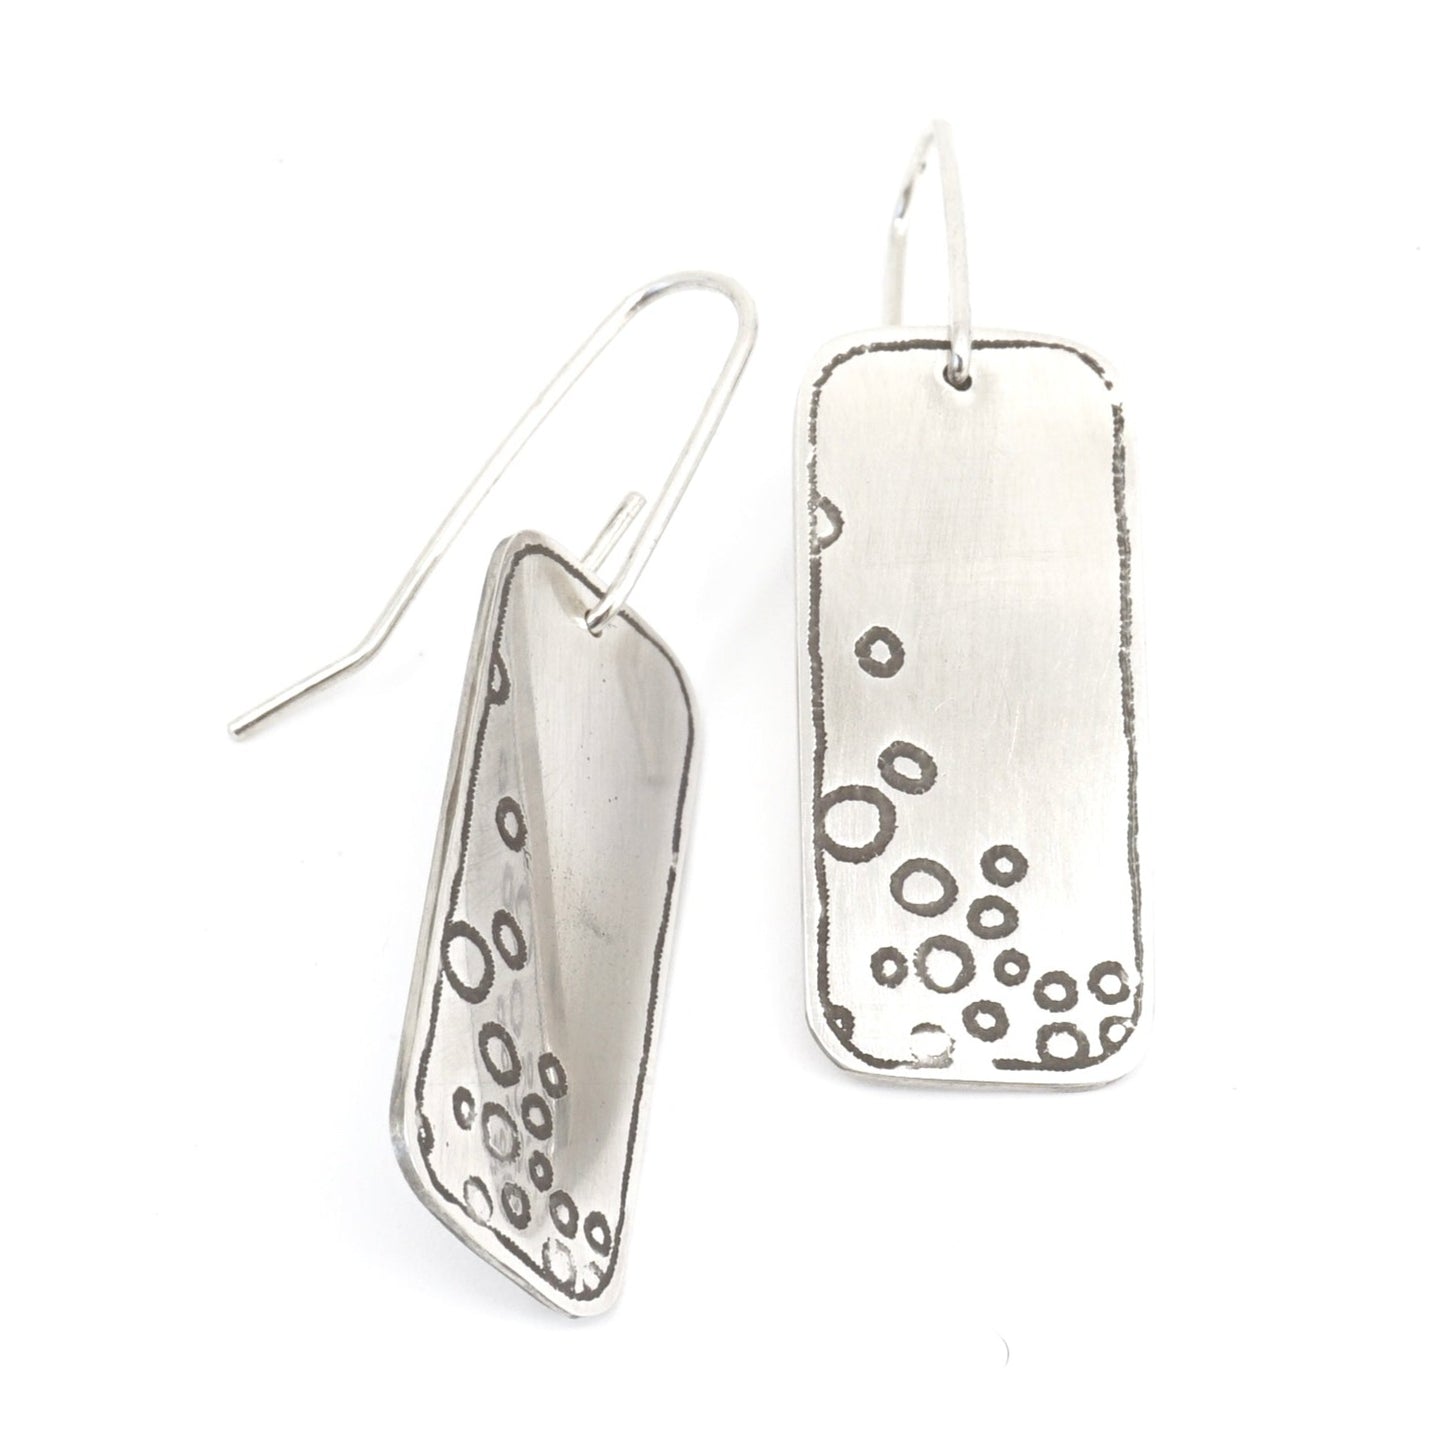 Growling Grass Frog Pattern Etched Rectangular Sterling Silver Drop Earrings